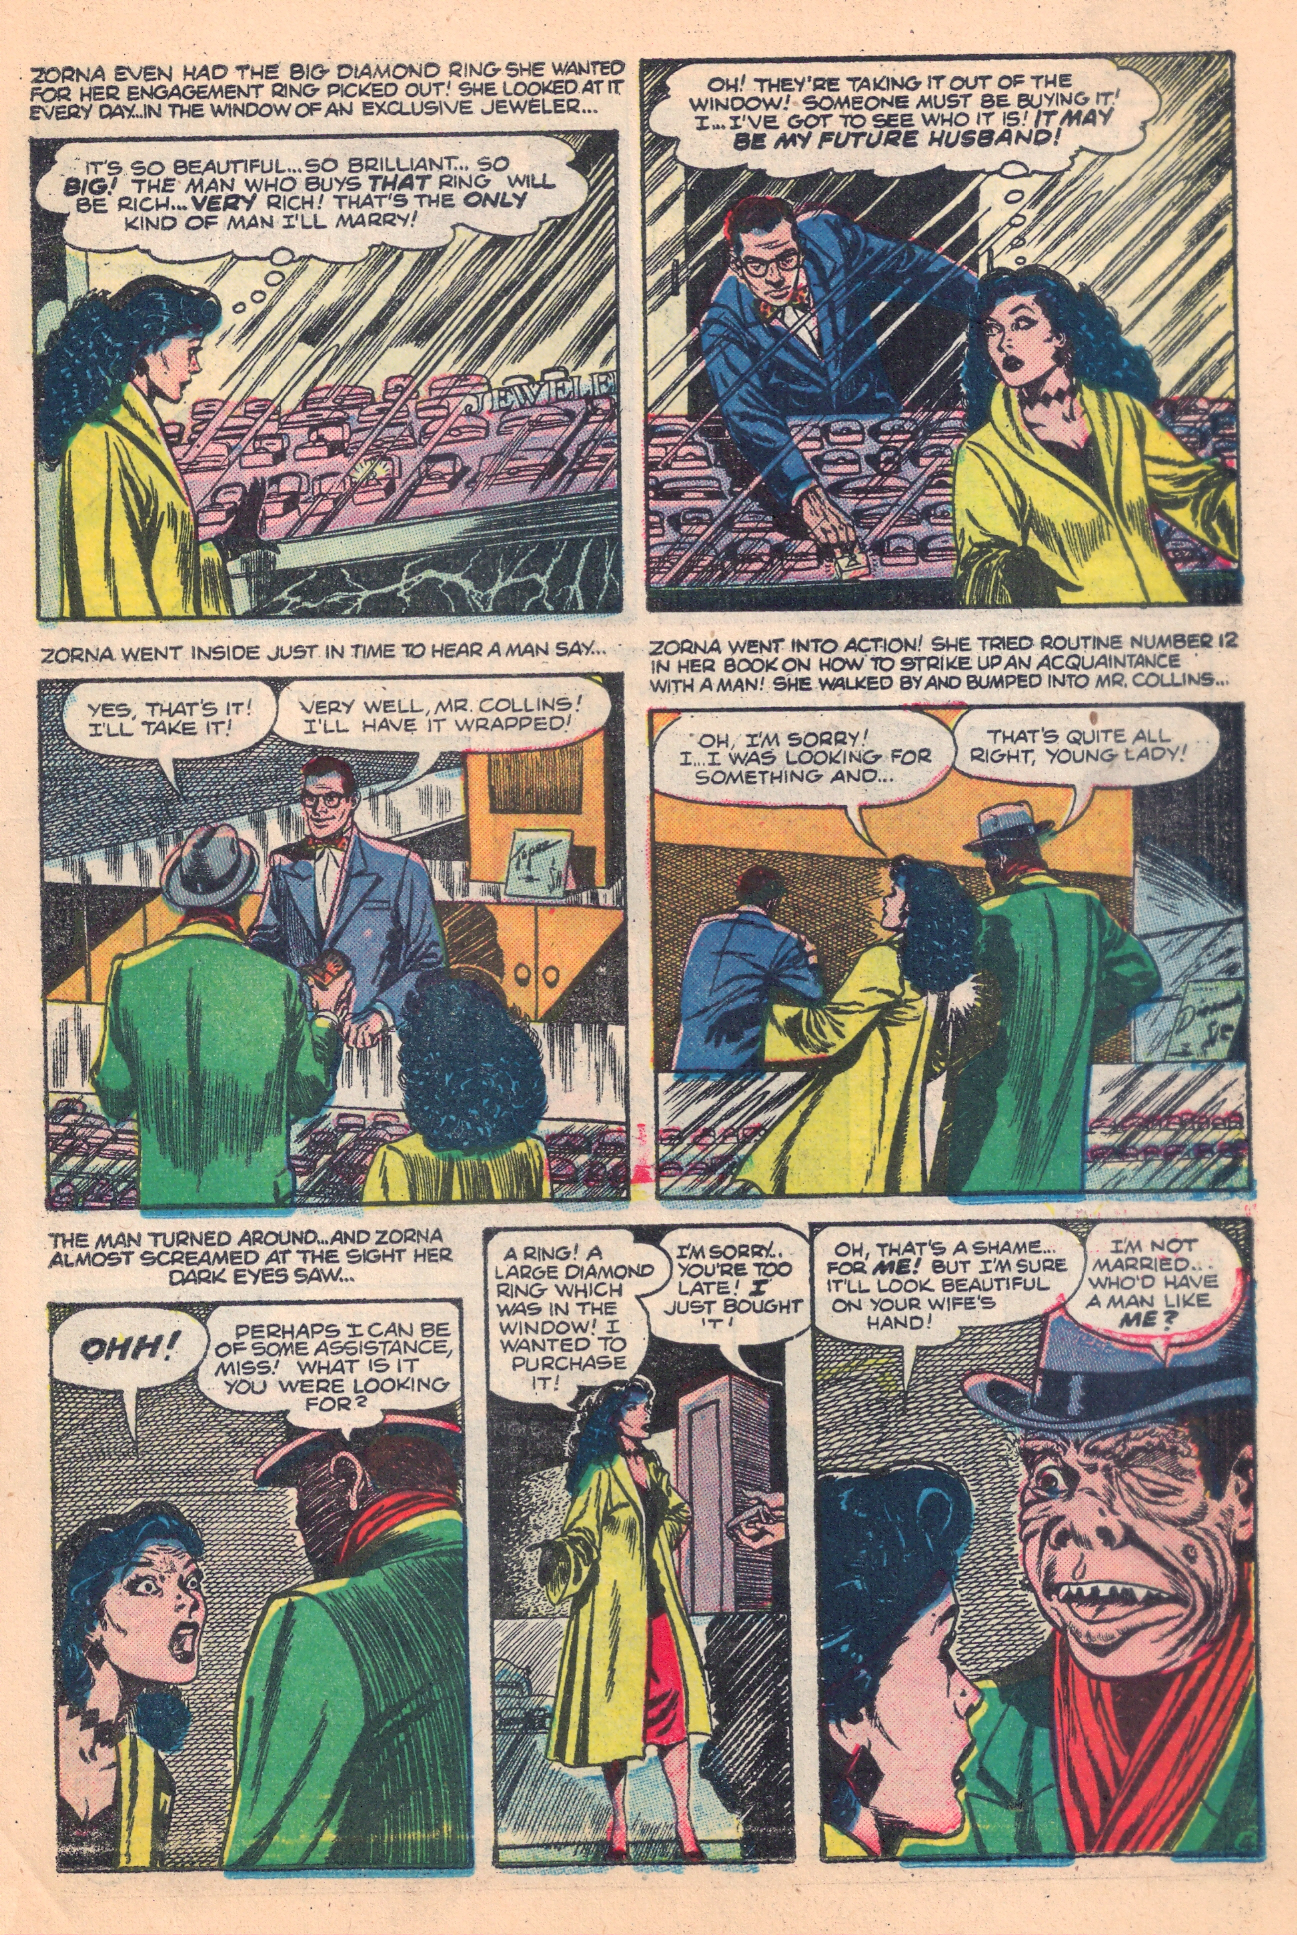 Marvel Tales (1949) 119 Page 12